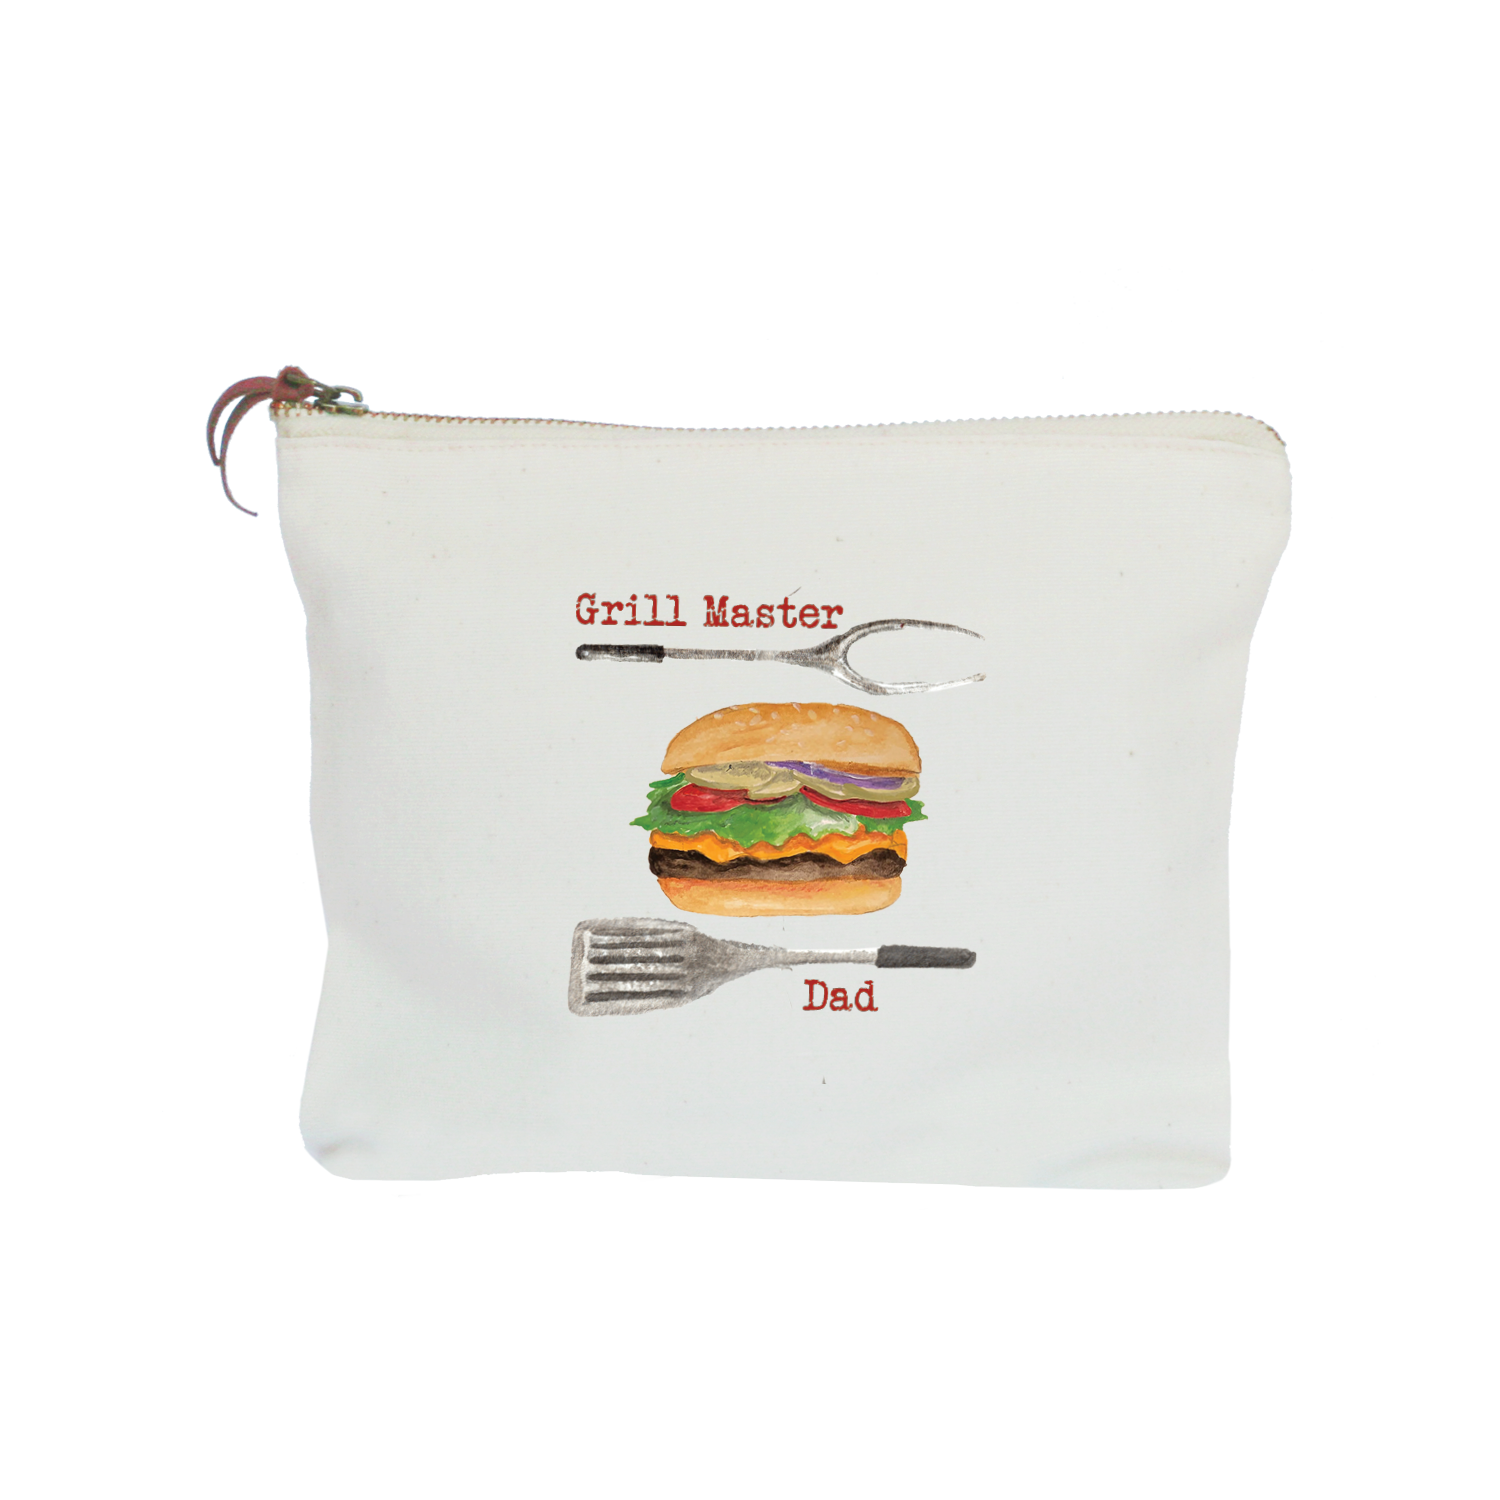 grill master dad zipper pouch